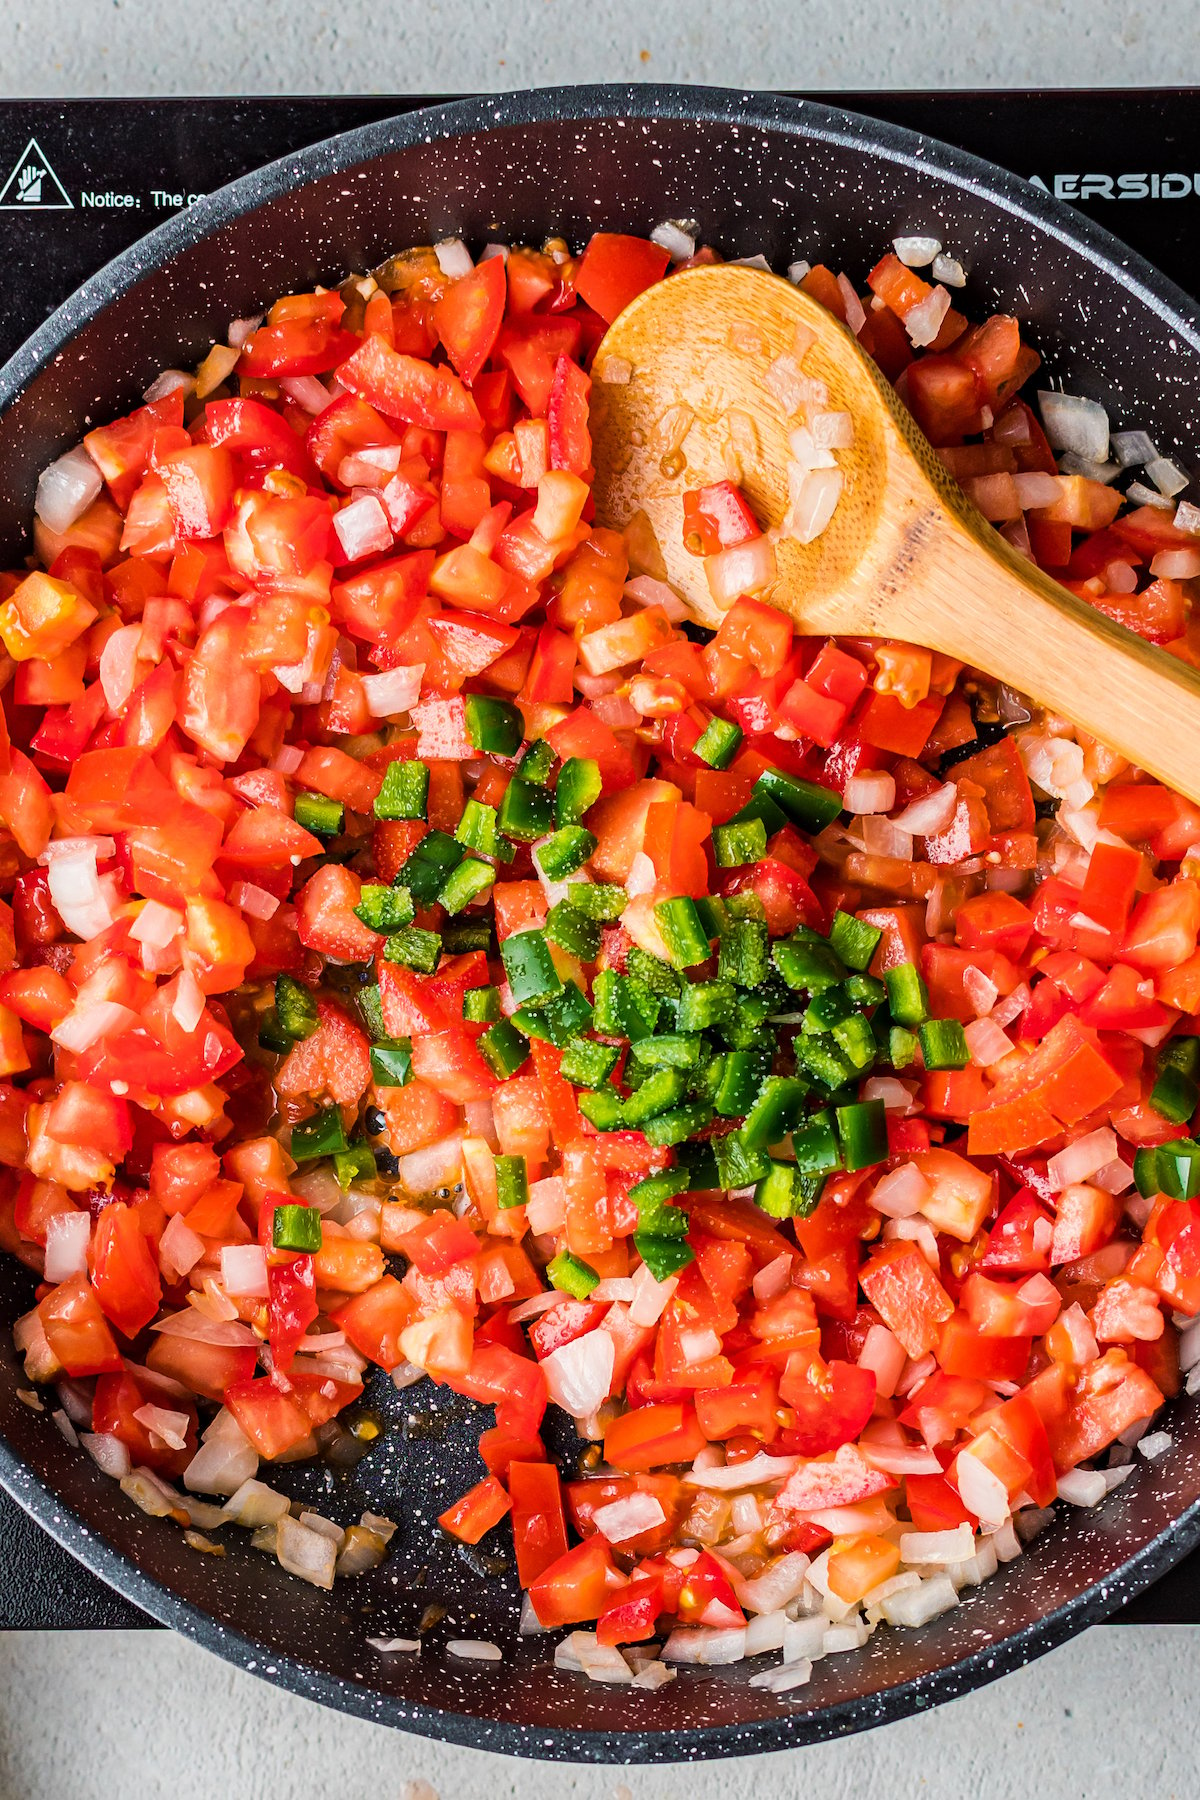 Tomatoes, jalapenos, and onion in a skillet.